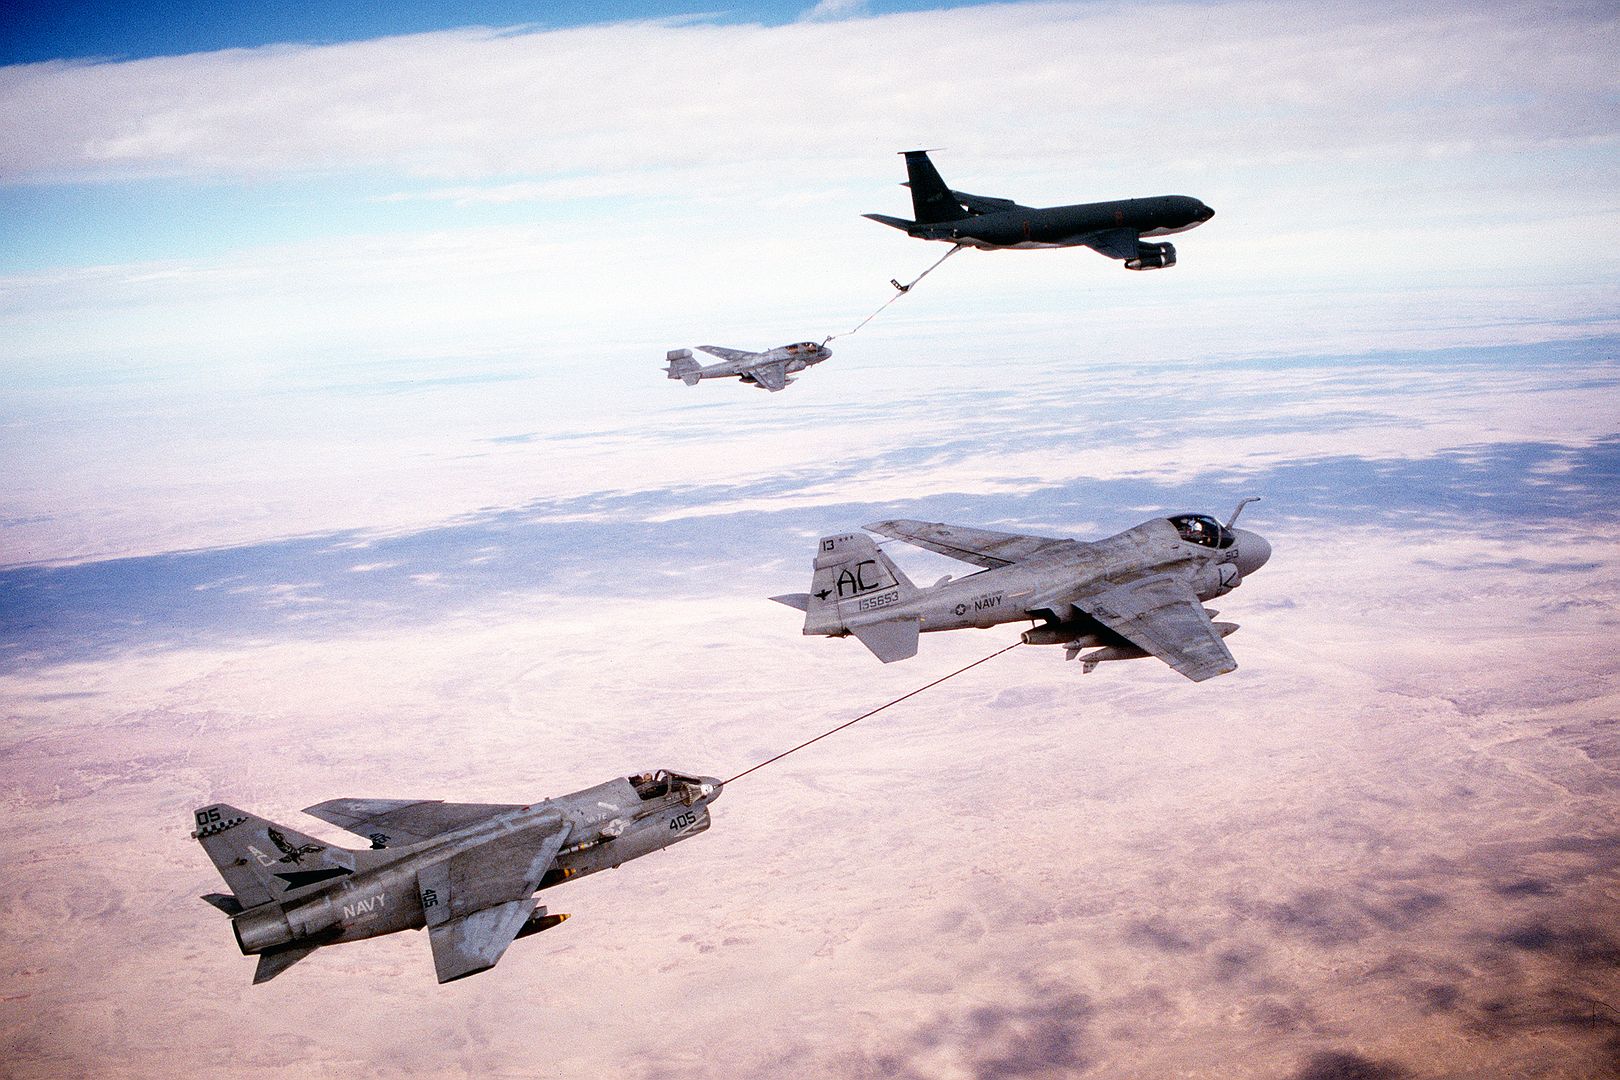 While En Route To Targets In Iraq During Operation Desert Storm An Attack Squadron 72 A 7E Corsair Aircraft Is Refueled By An Attack Squadron 75 A 6E Intruder